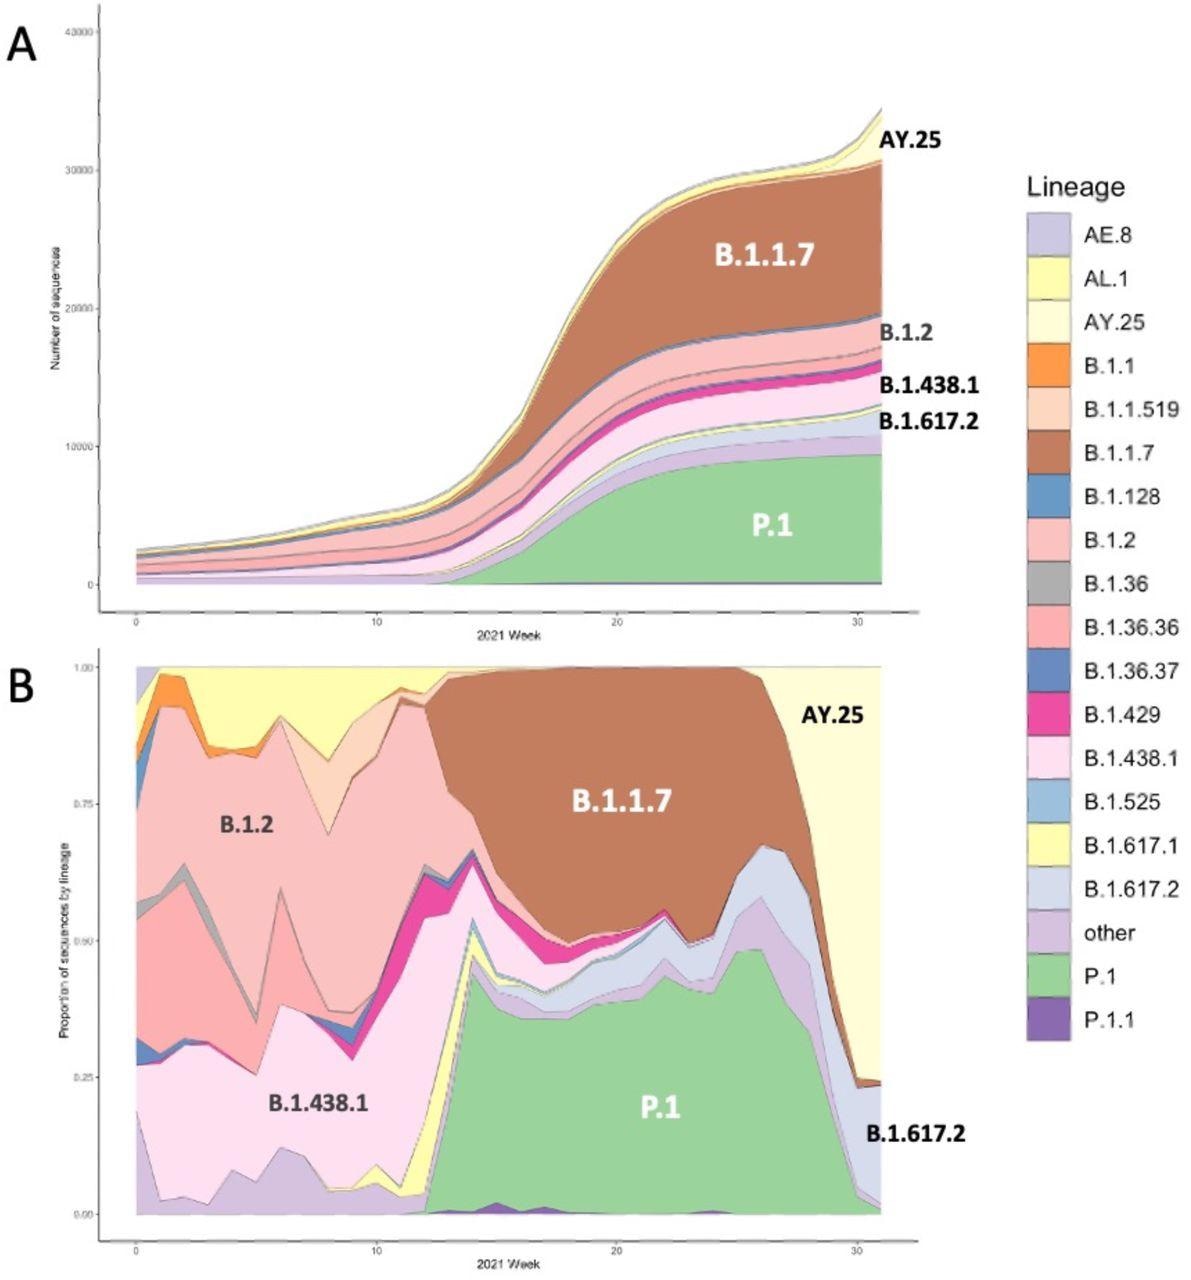 The cumulative number (A) and lineage proportion (B) of SARS-CoV-2 sequences per week included in the study, coloured by lineage. Major lineages present in the data are annotated.